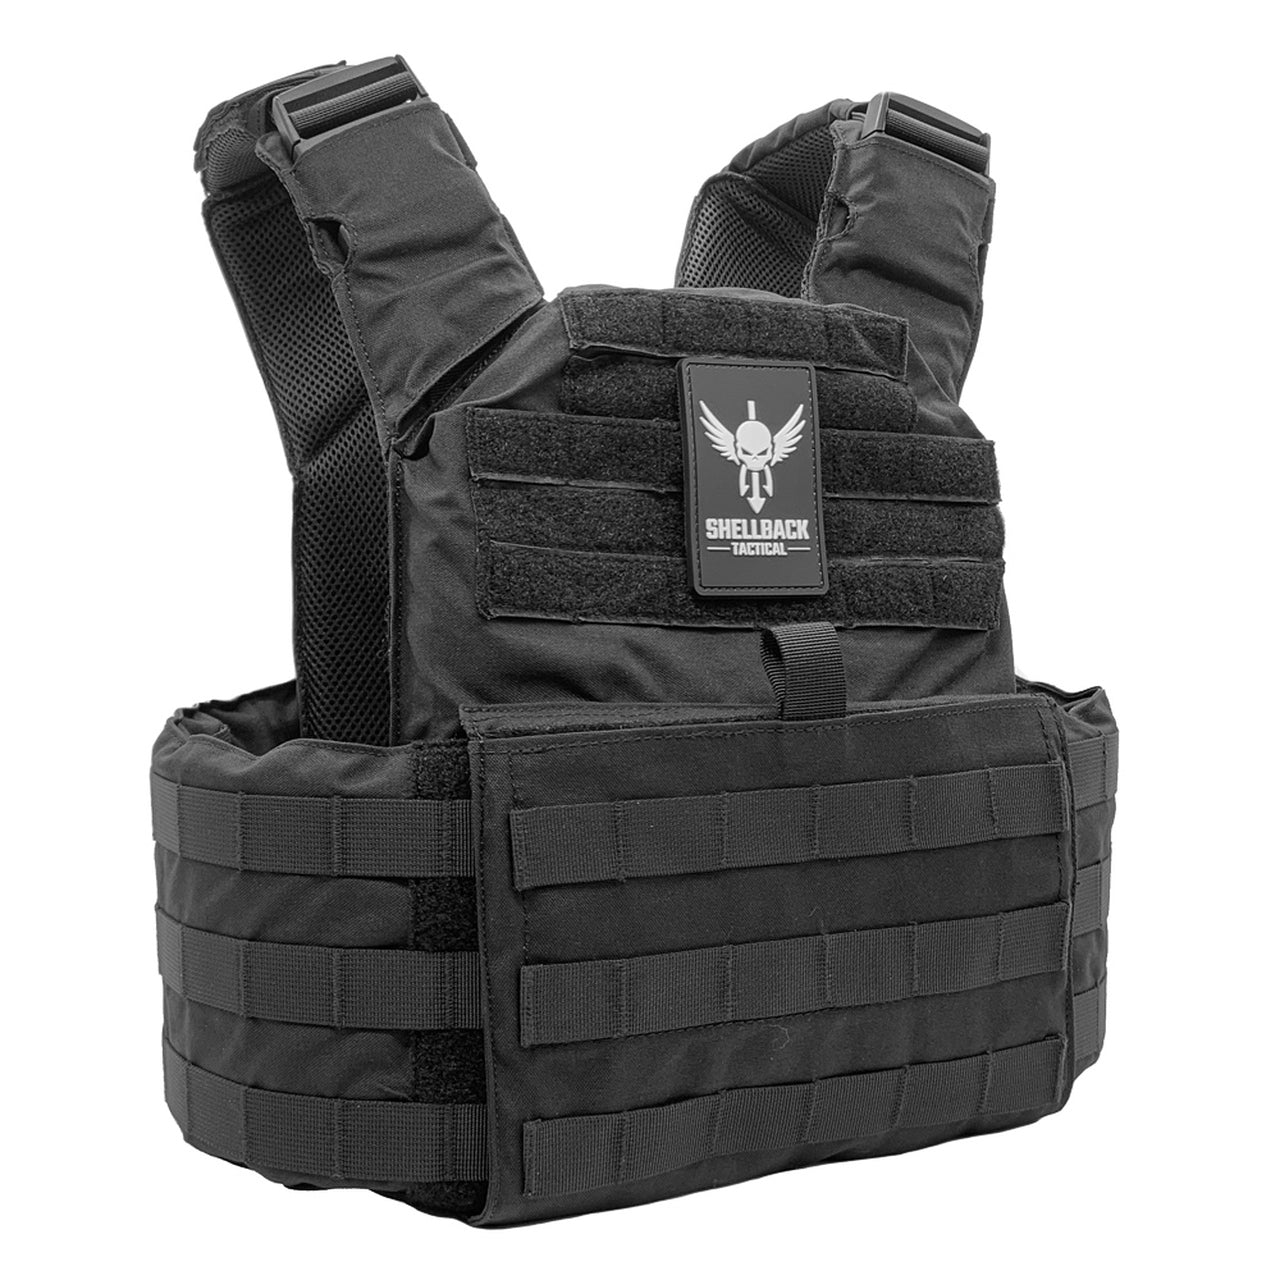 A Shellback Tactical Skirmish Plate Carrier on a white background.